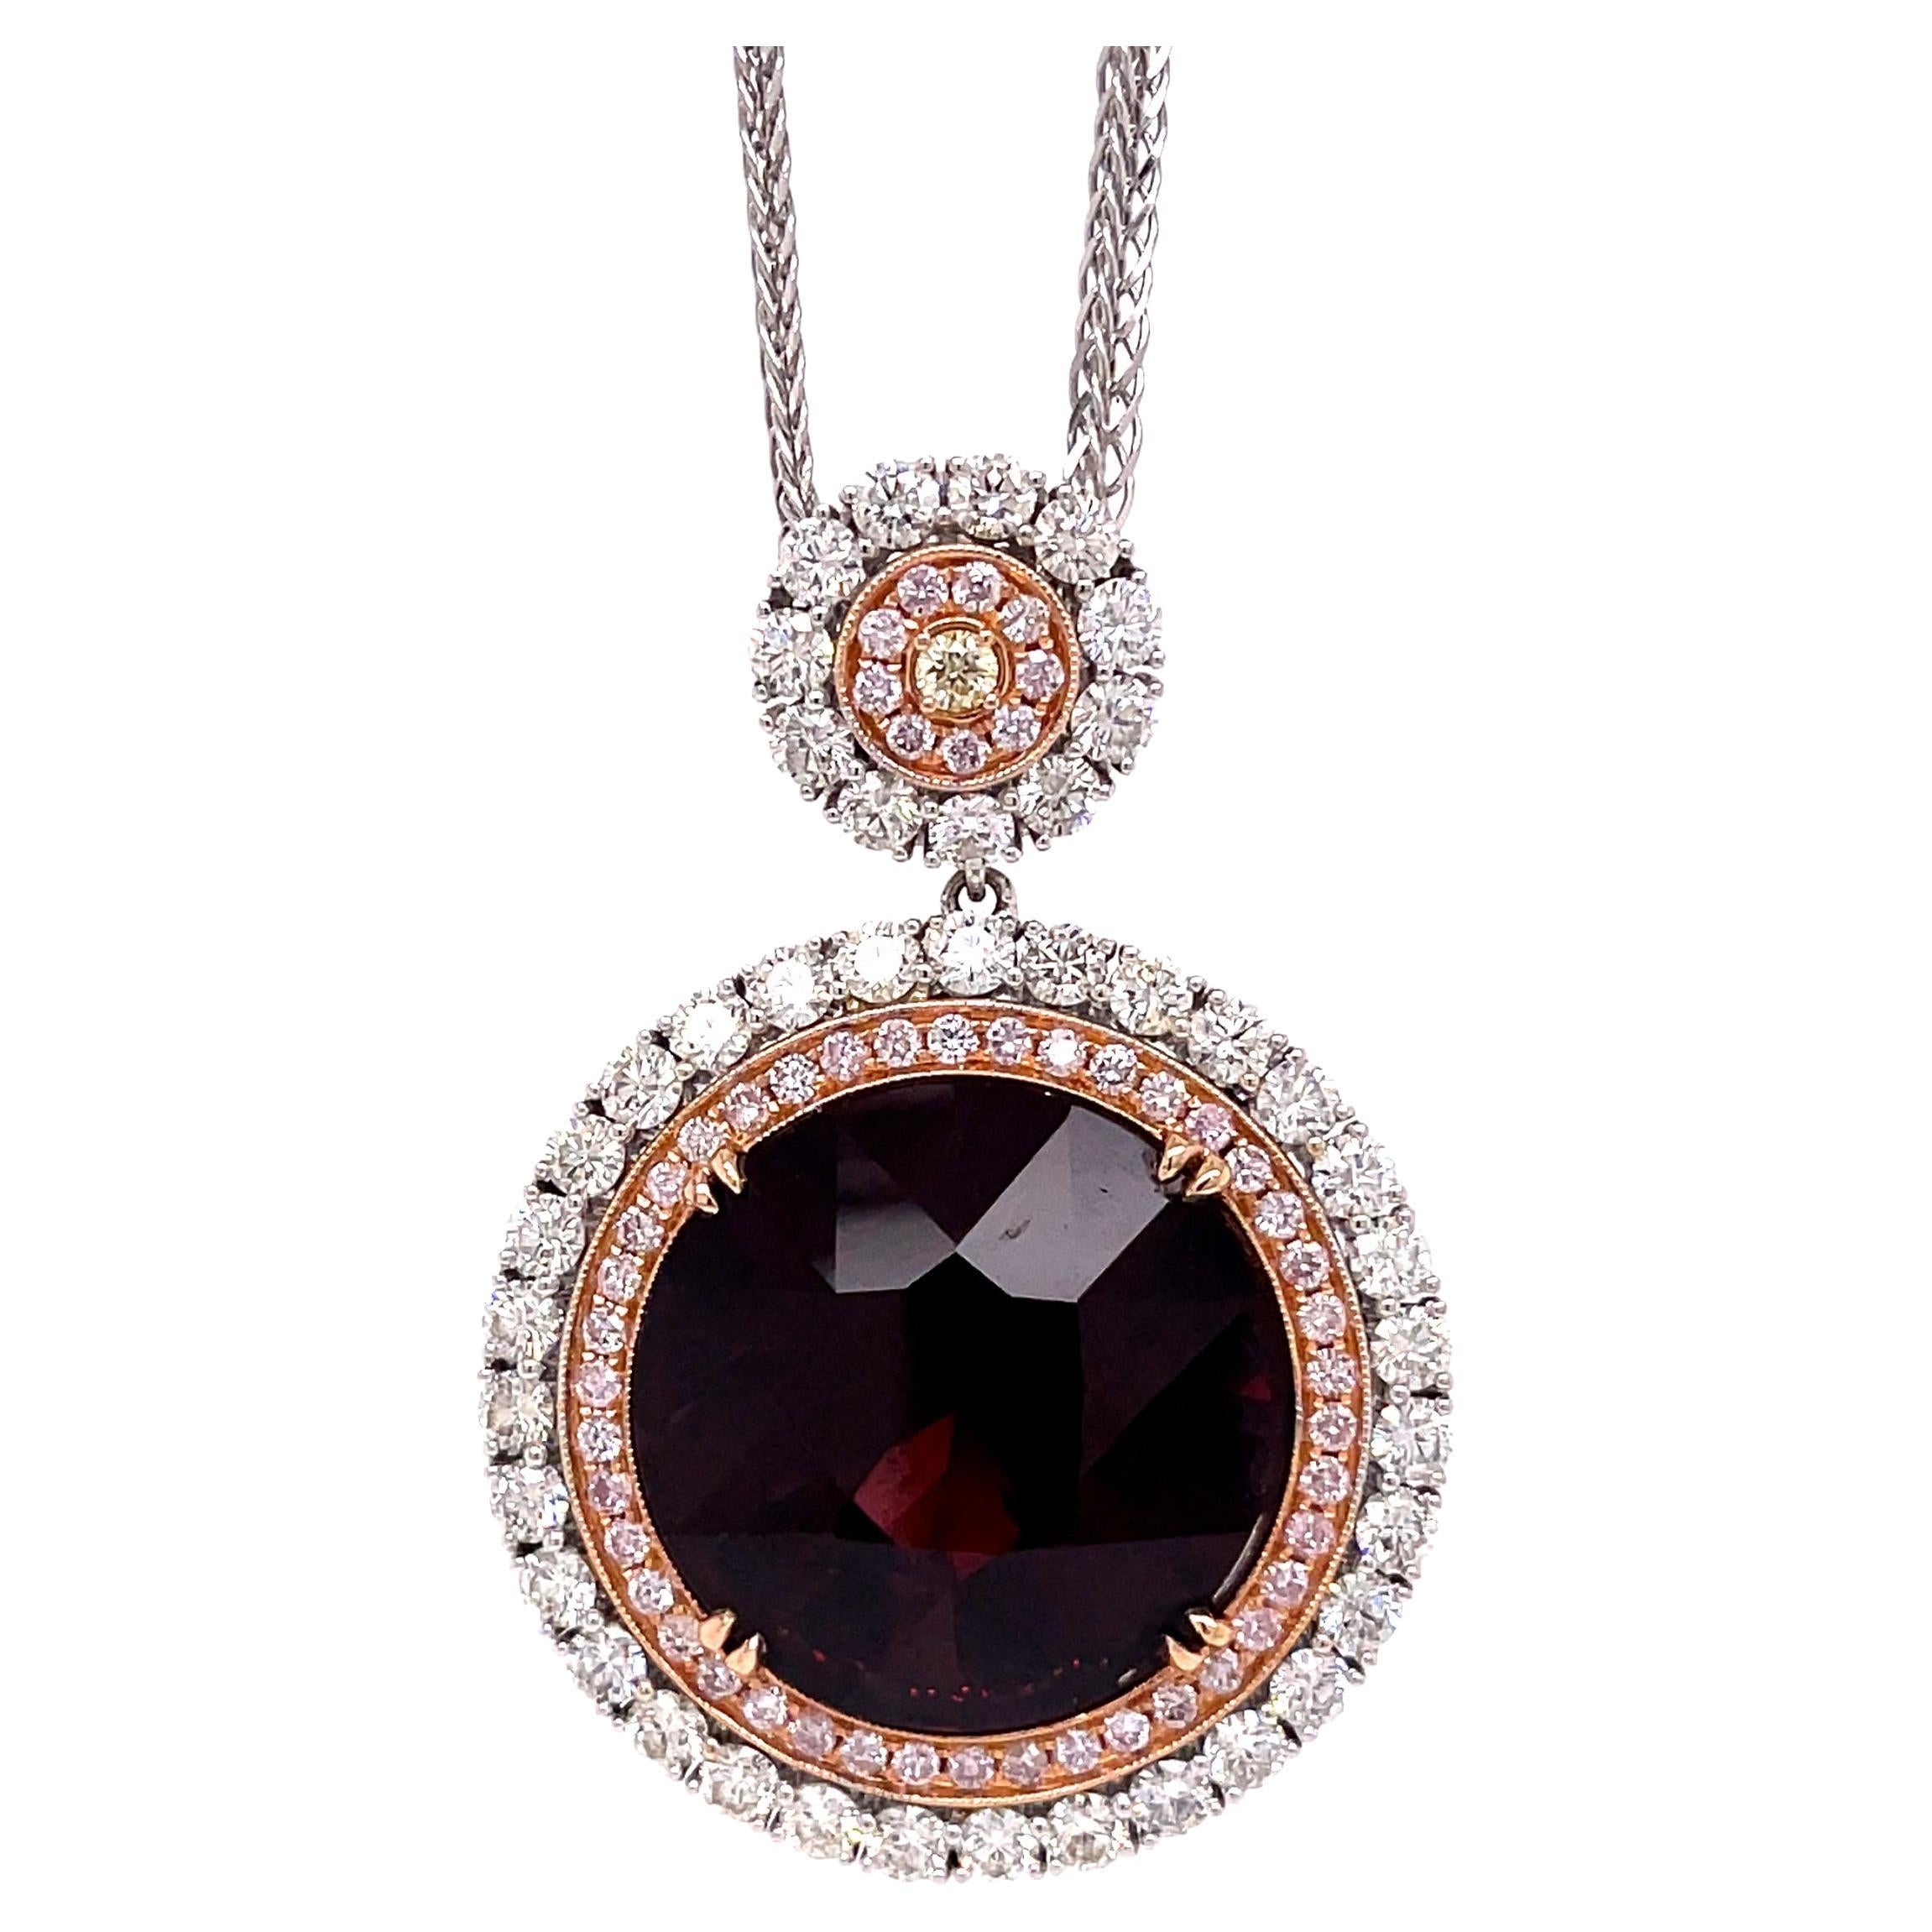 GIA Certified 31.02 Carat Round Faceted Red Spinel & Diamond Pendant in 18KT 